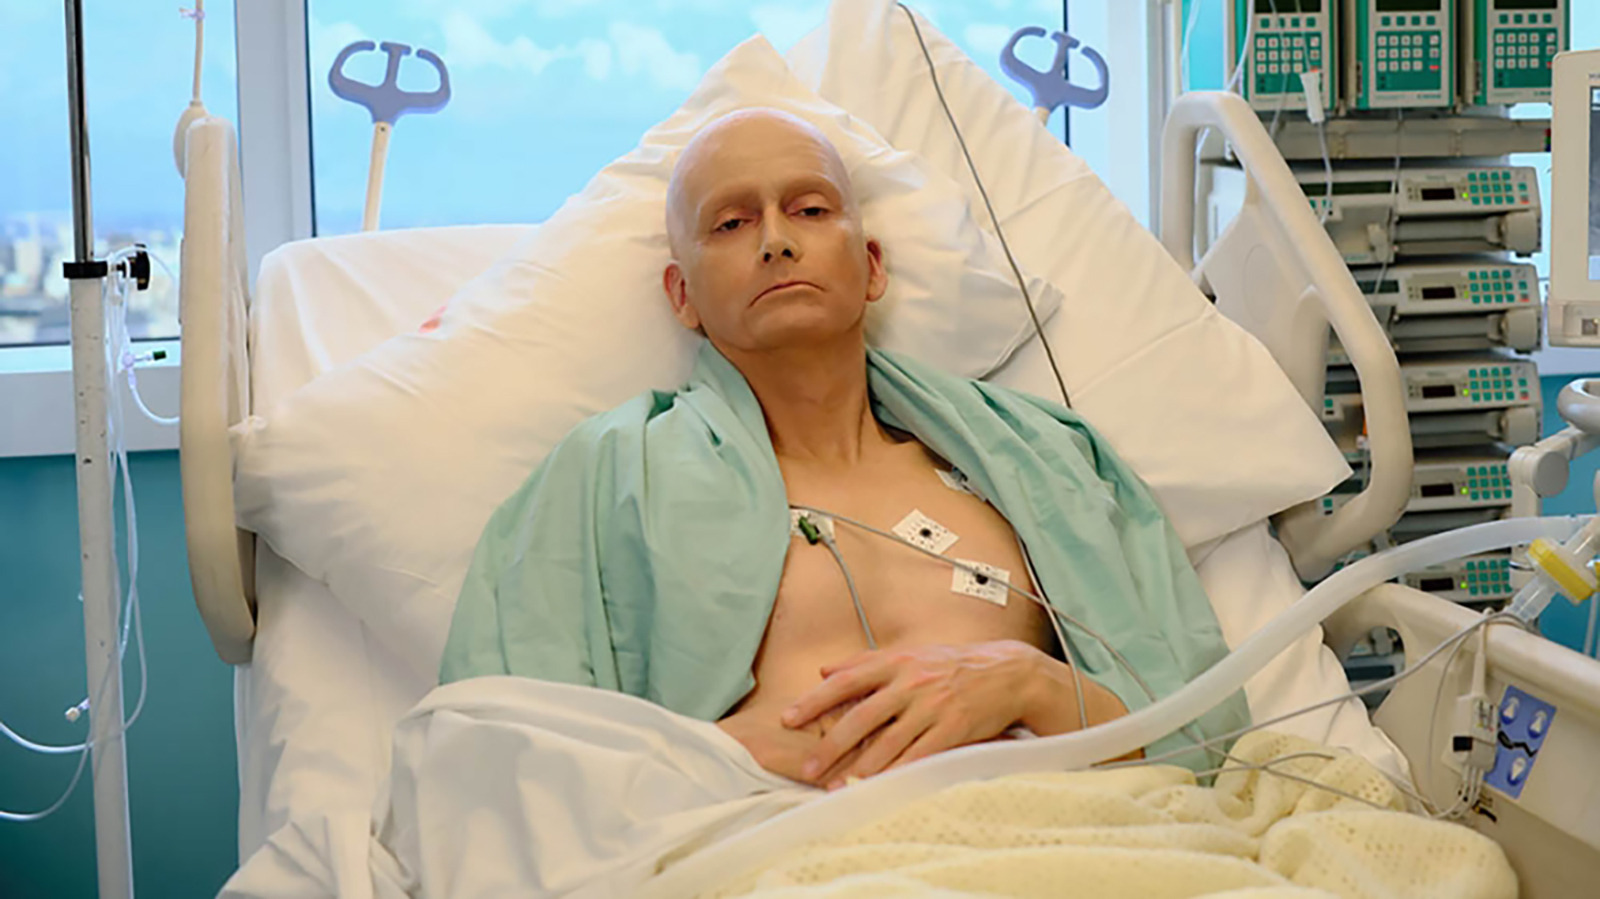 Here’s The First Look At David Tennant As Poisoned Russian Defector Alexander Litvinenko